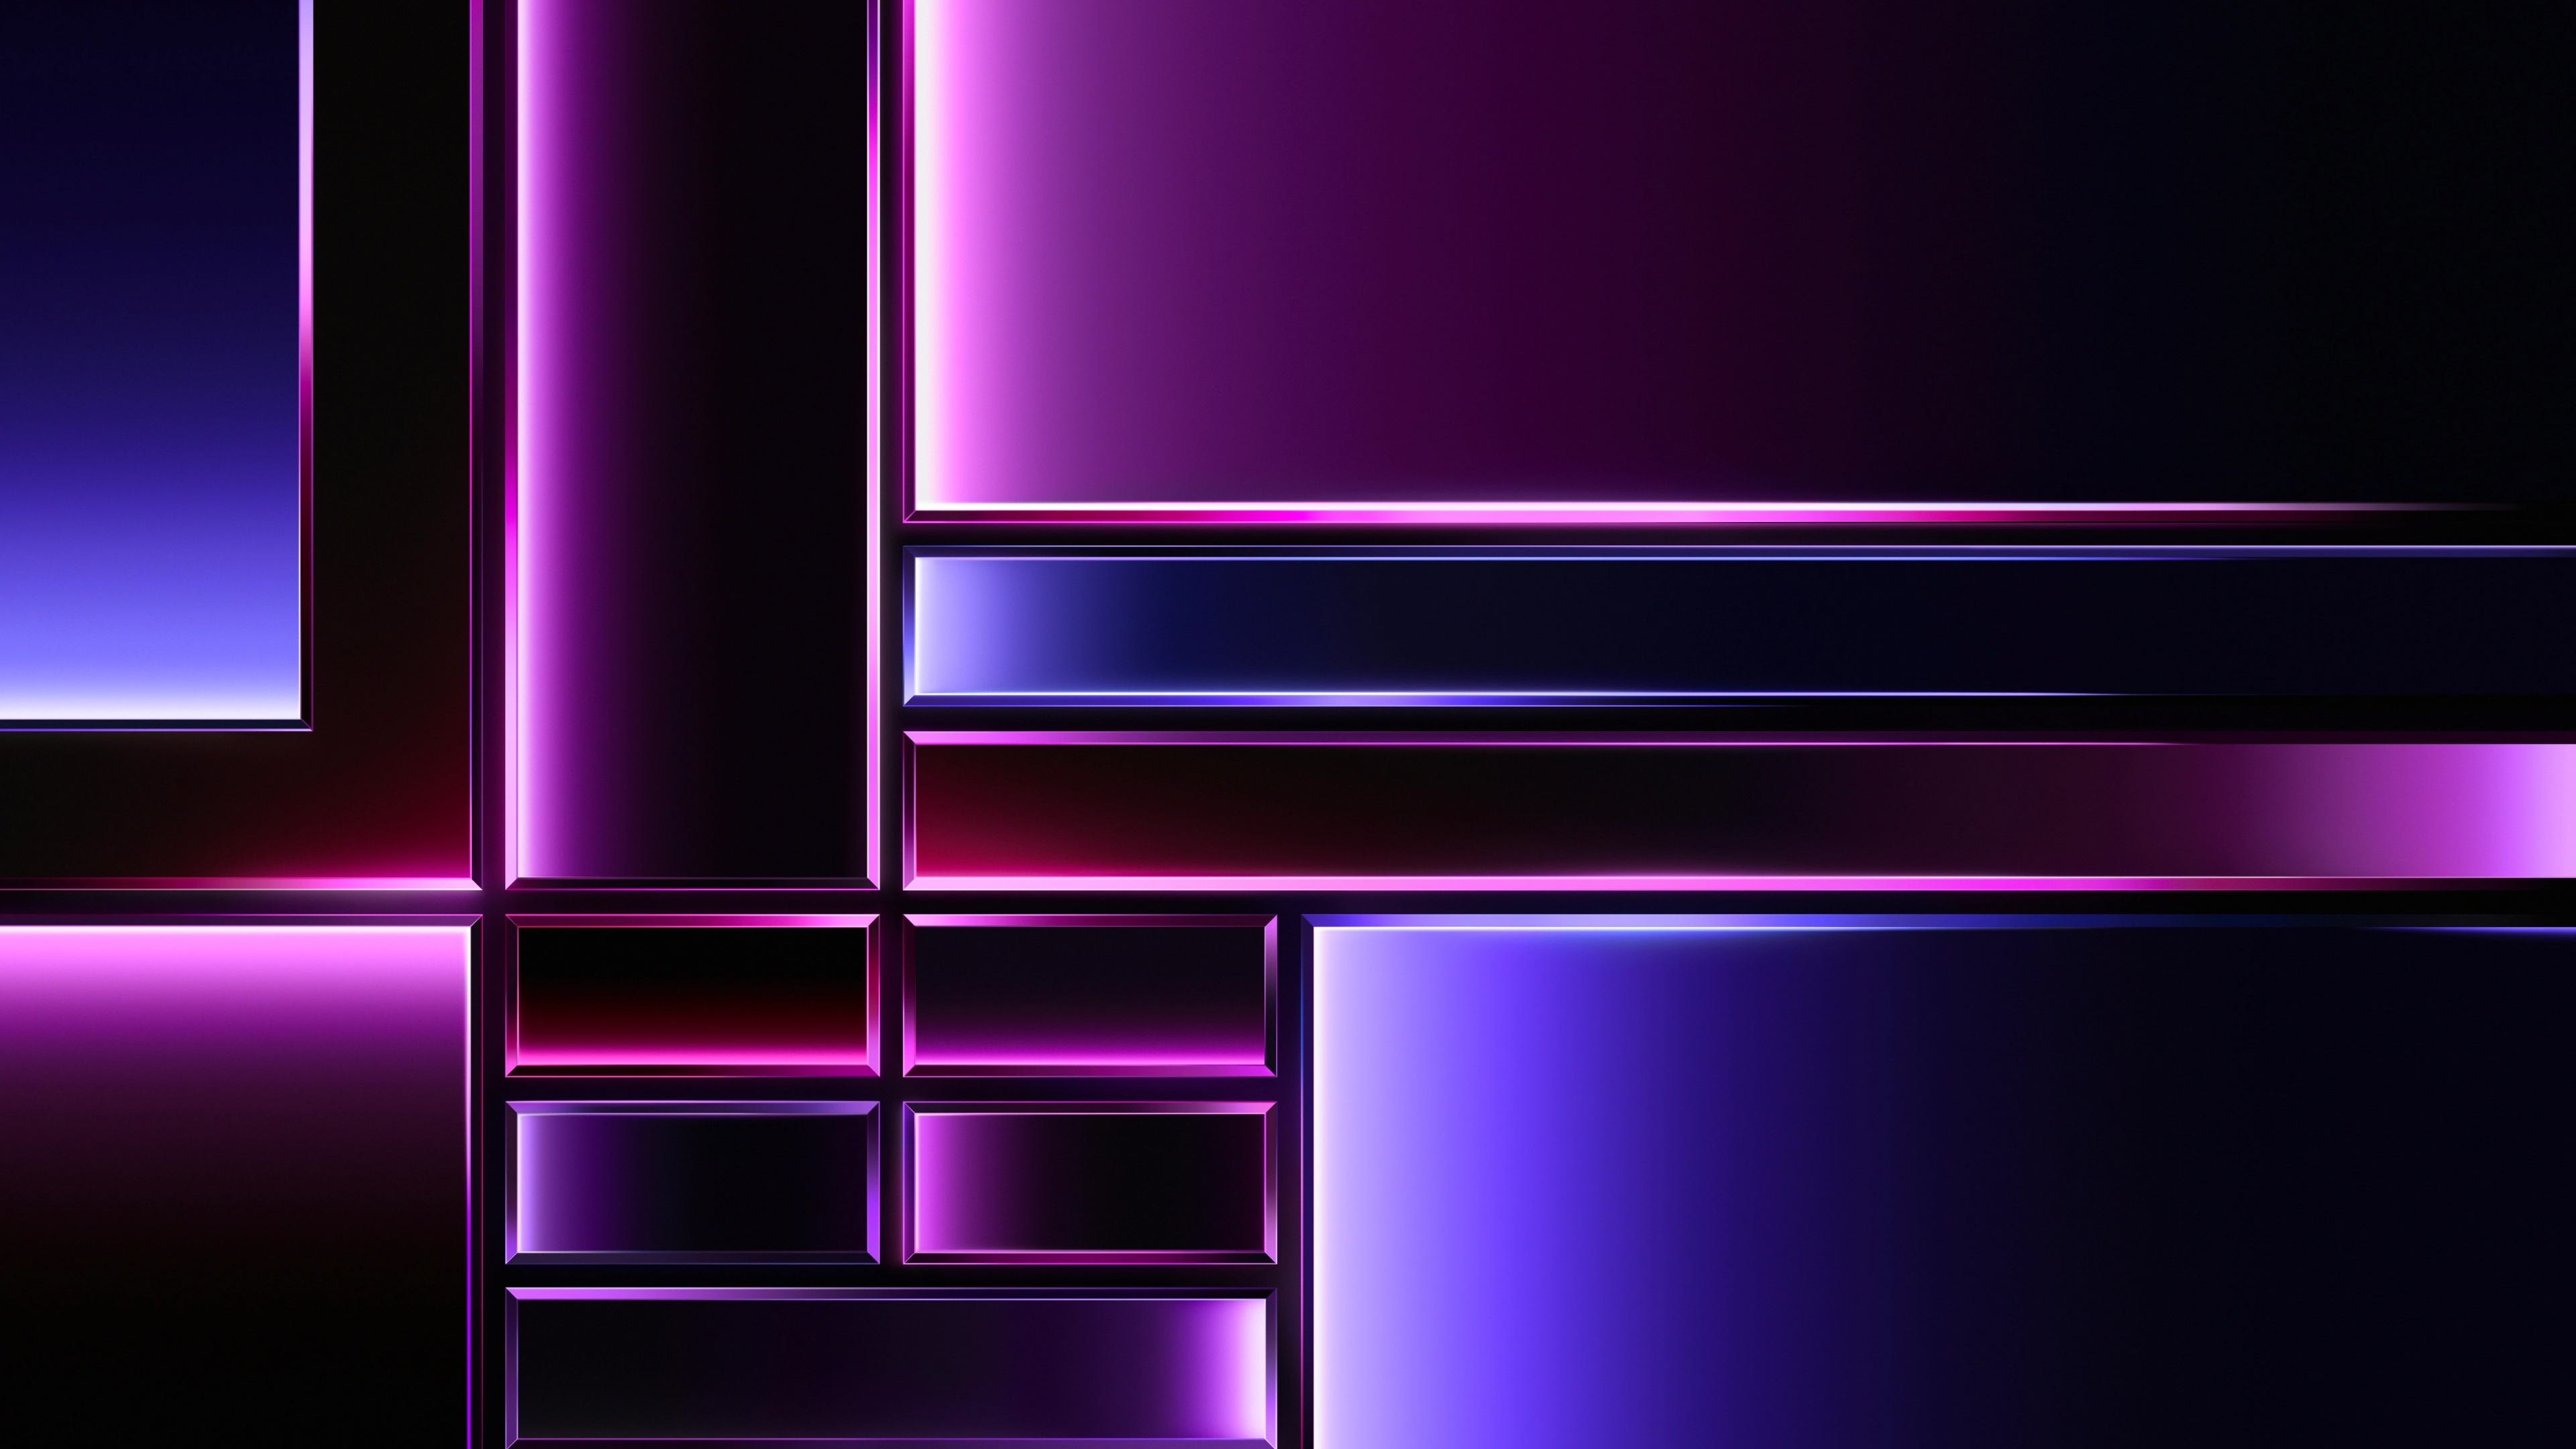 Glowing Neon Lines Tunnel Abstract Technological Background Virtual Reality  Pink Blue Purple Neon Triangular Corridor Perspective Ultraviolet Bright  Glow Vector Illustration Stock Illustration - Download Image Now - iStock